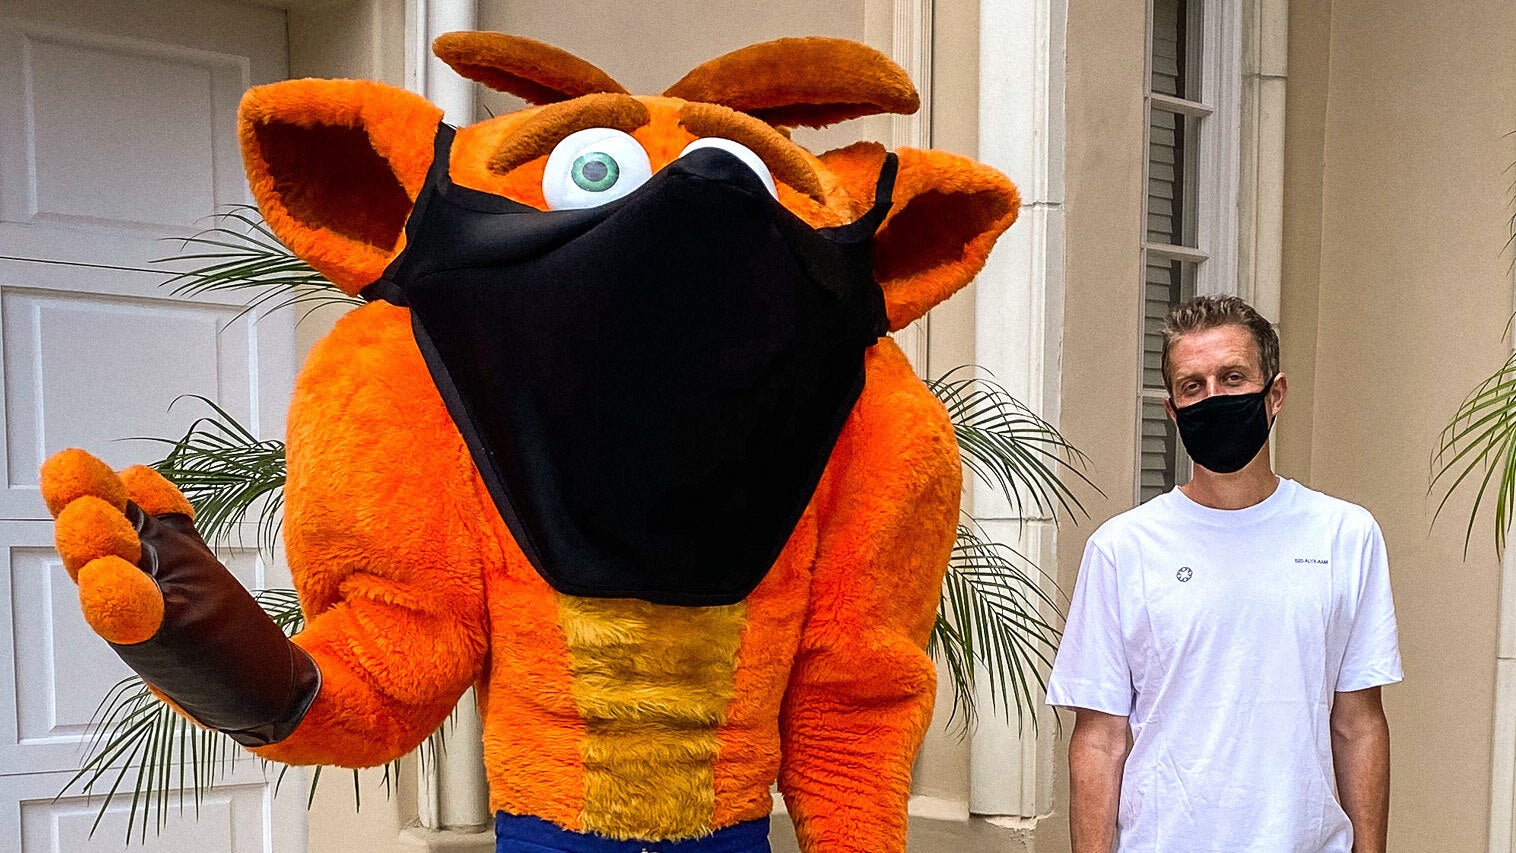 Crash and Geoff Keighley pose for the inaugural Summer Game Fest in 2020. (Photo: Summer Game Fest)